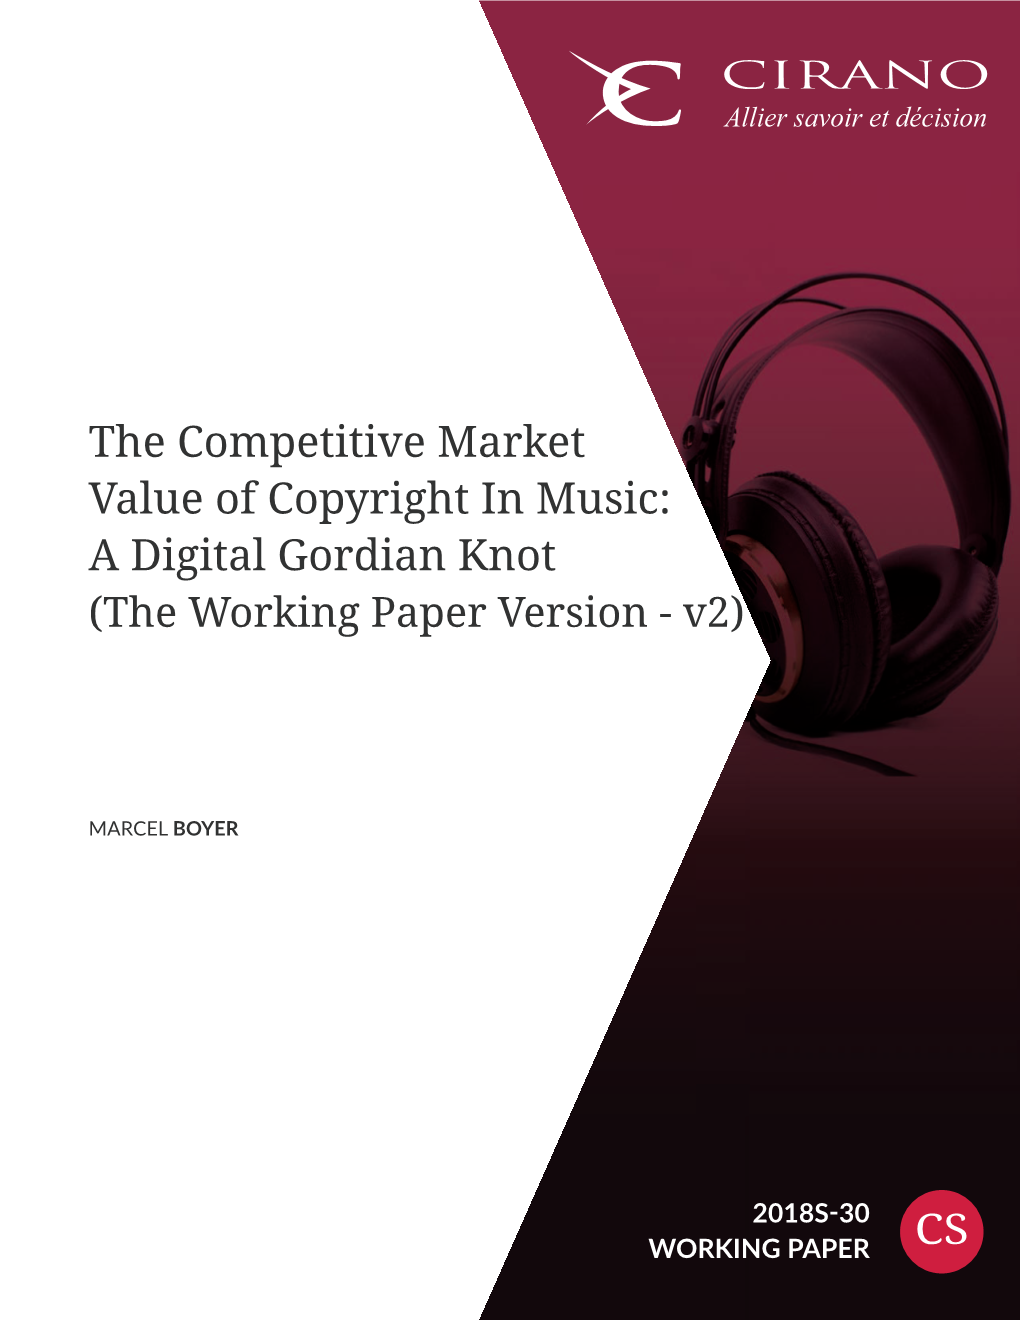 The Competitive Market Value of Copyright in Music: a Digital Gordian Knot (The Working Paper Version - V2)